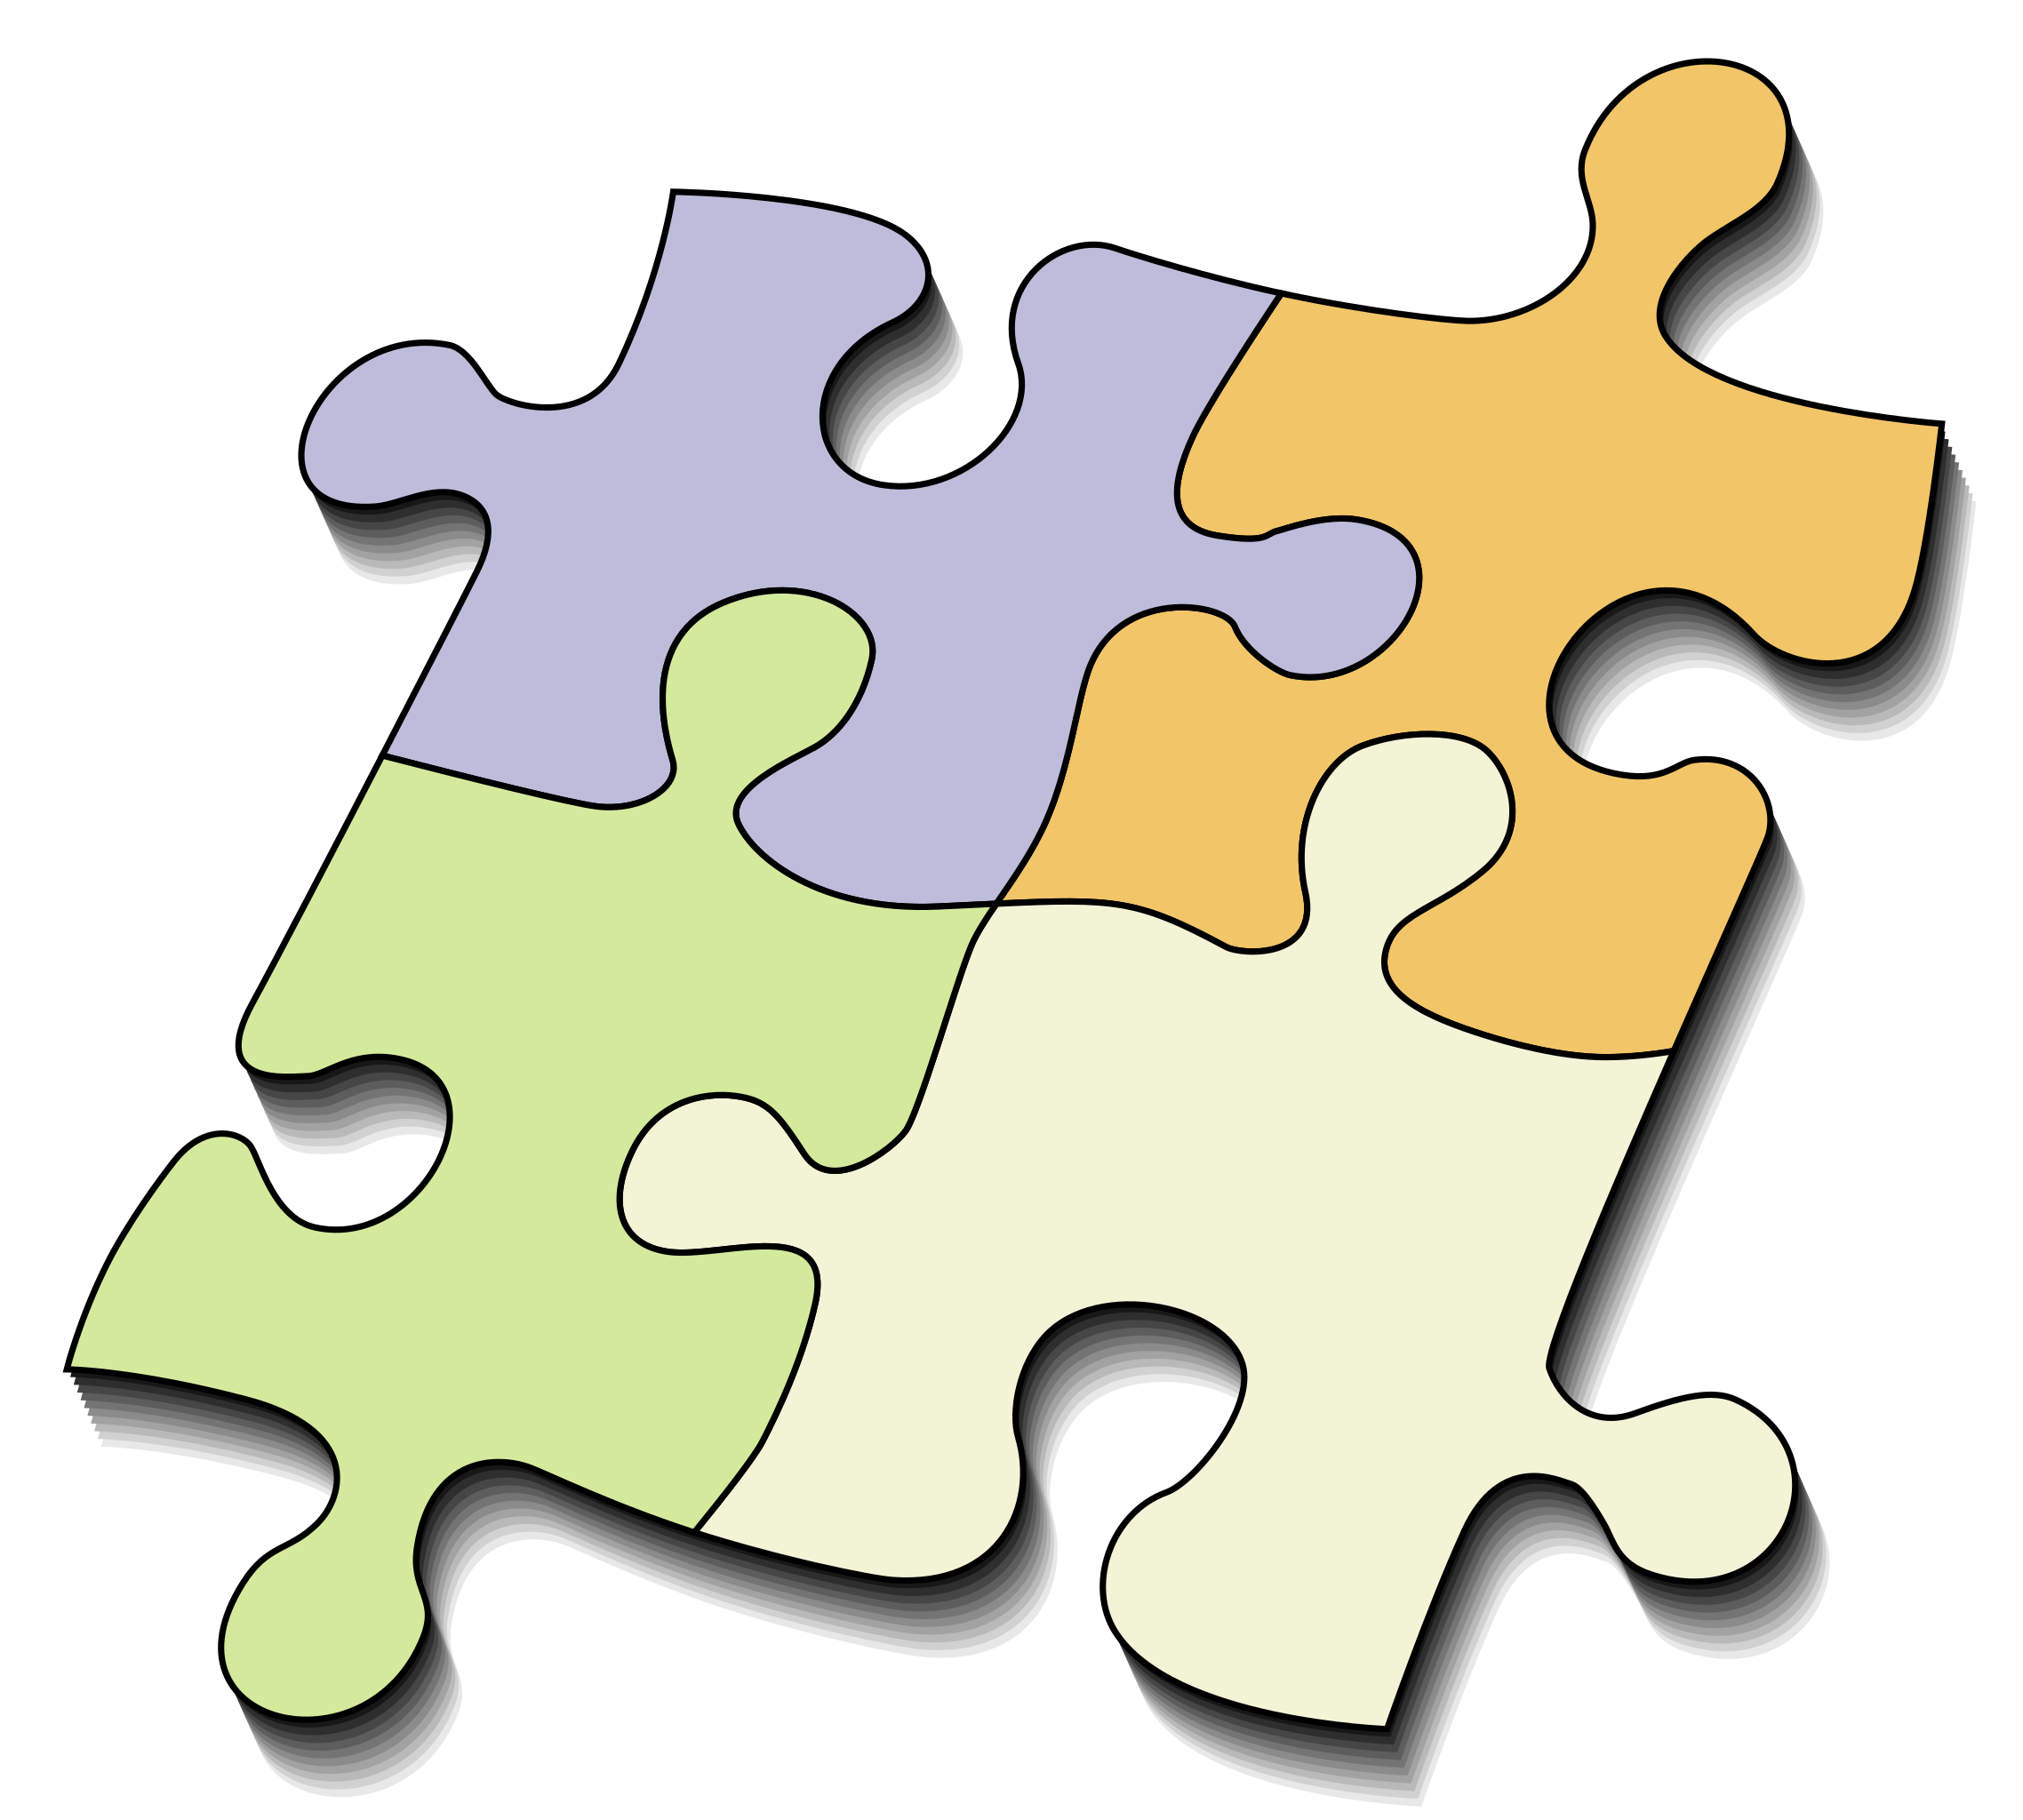 File:Jigsaw.svg - Wikimedia Commons In Jigsaw Puzzle Template For Word